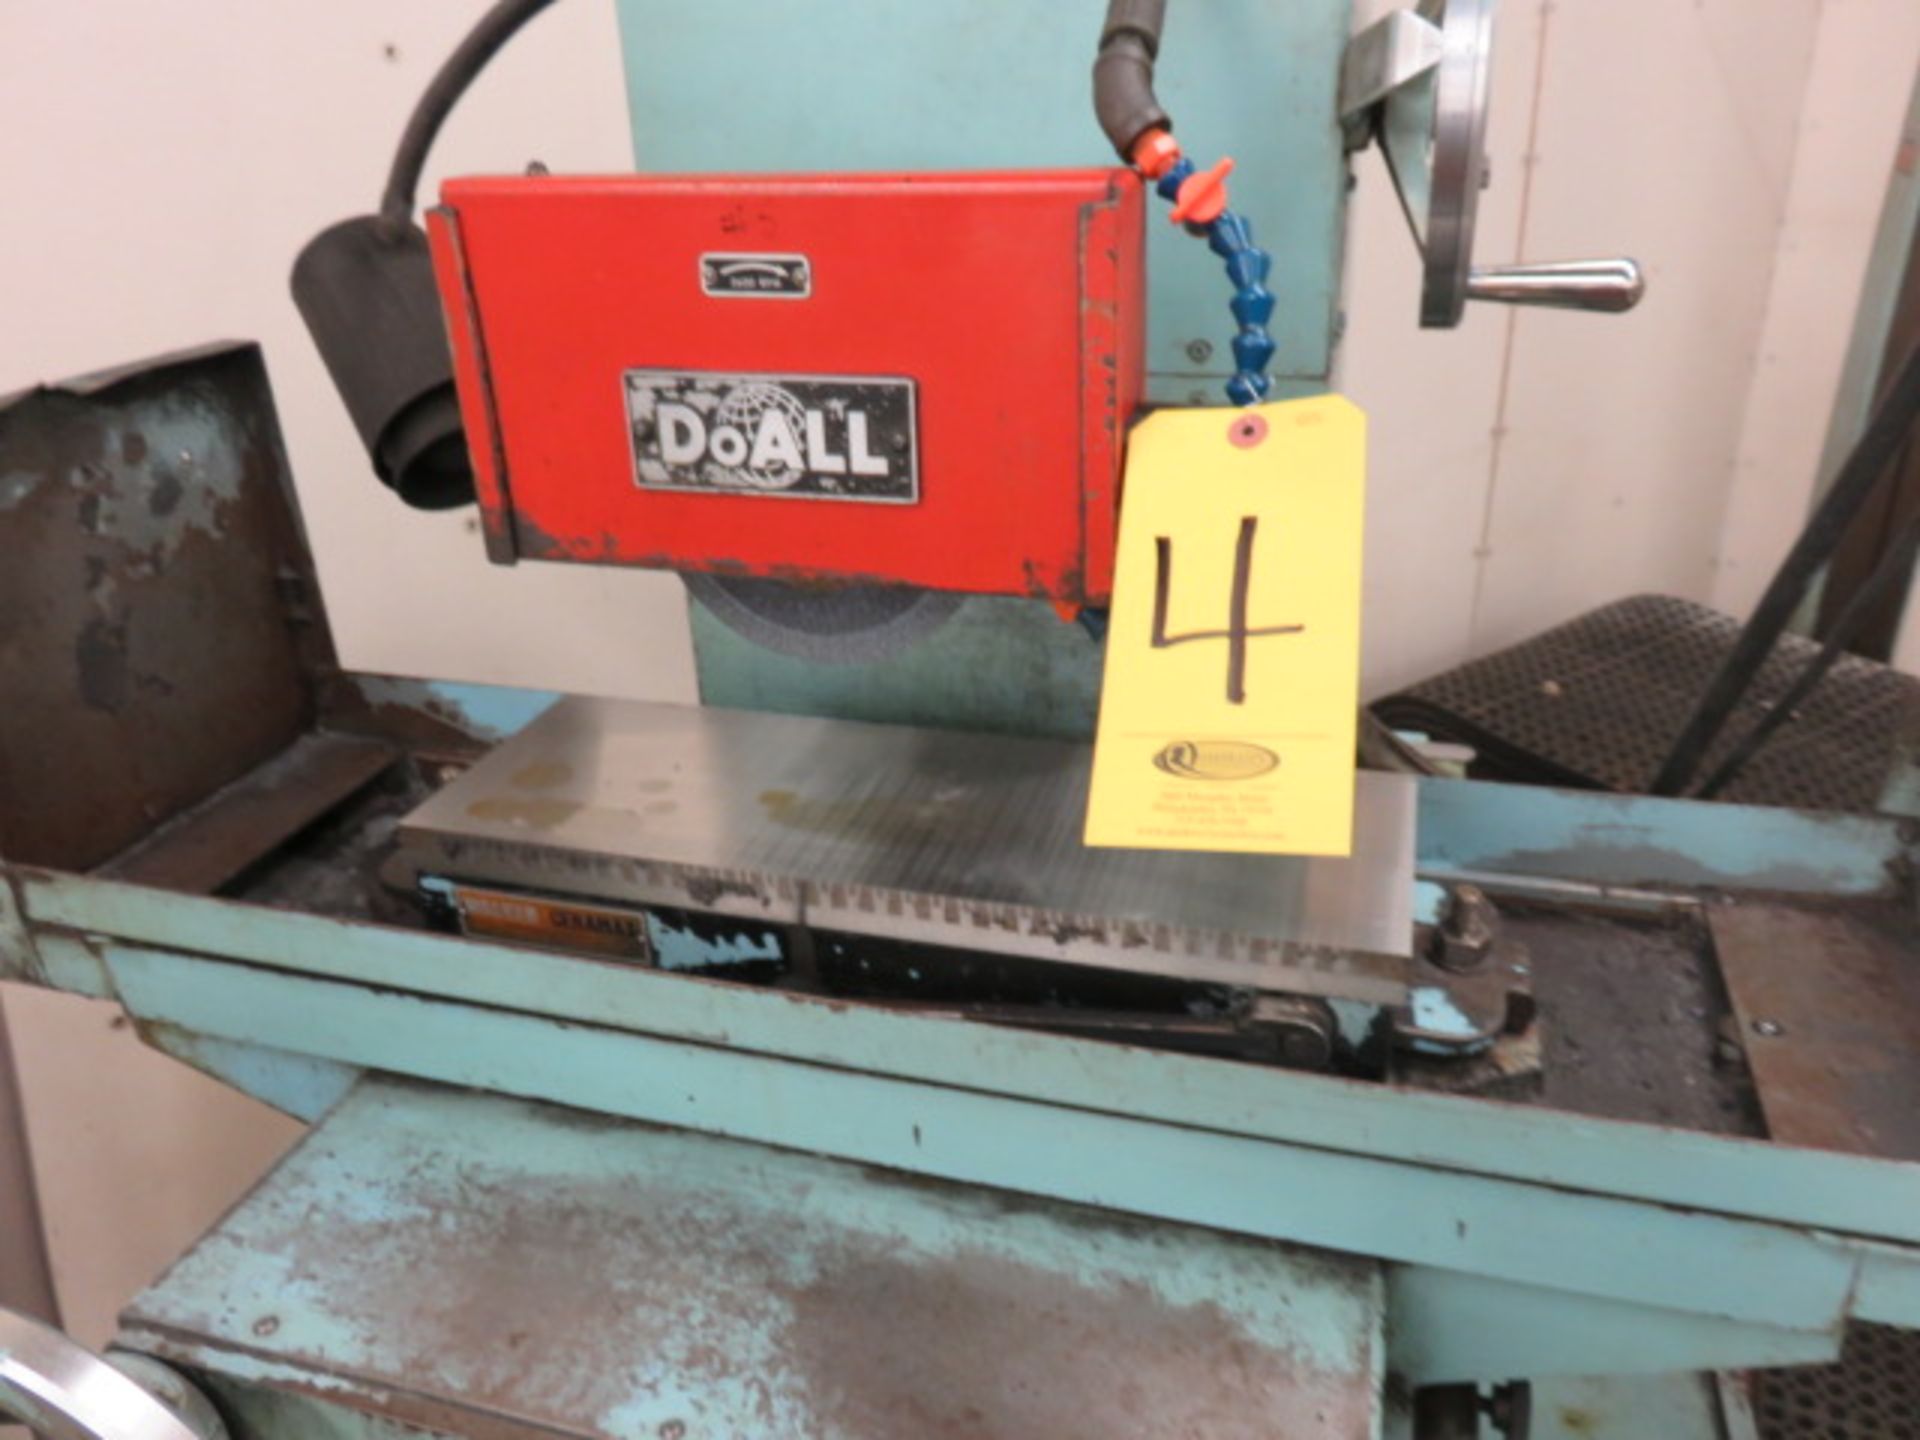 1984 DOALL VS618 SURFACE GRINDER, S/N 357-84764, 6 IN X 18 IN WALKER PERMANENT MAGNETIC CHUCK